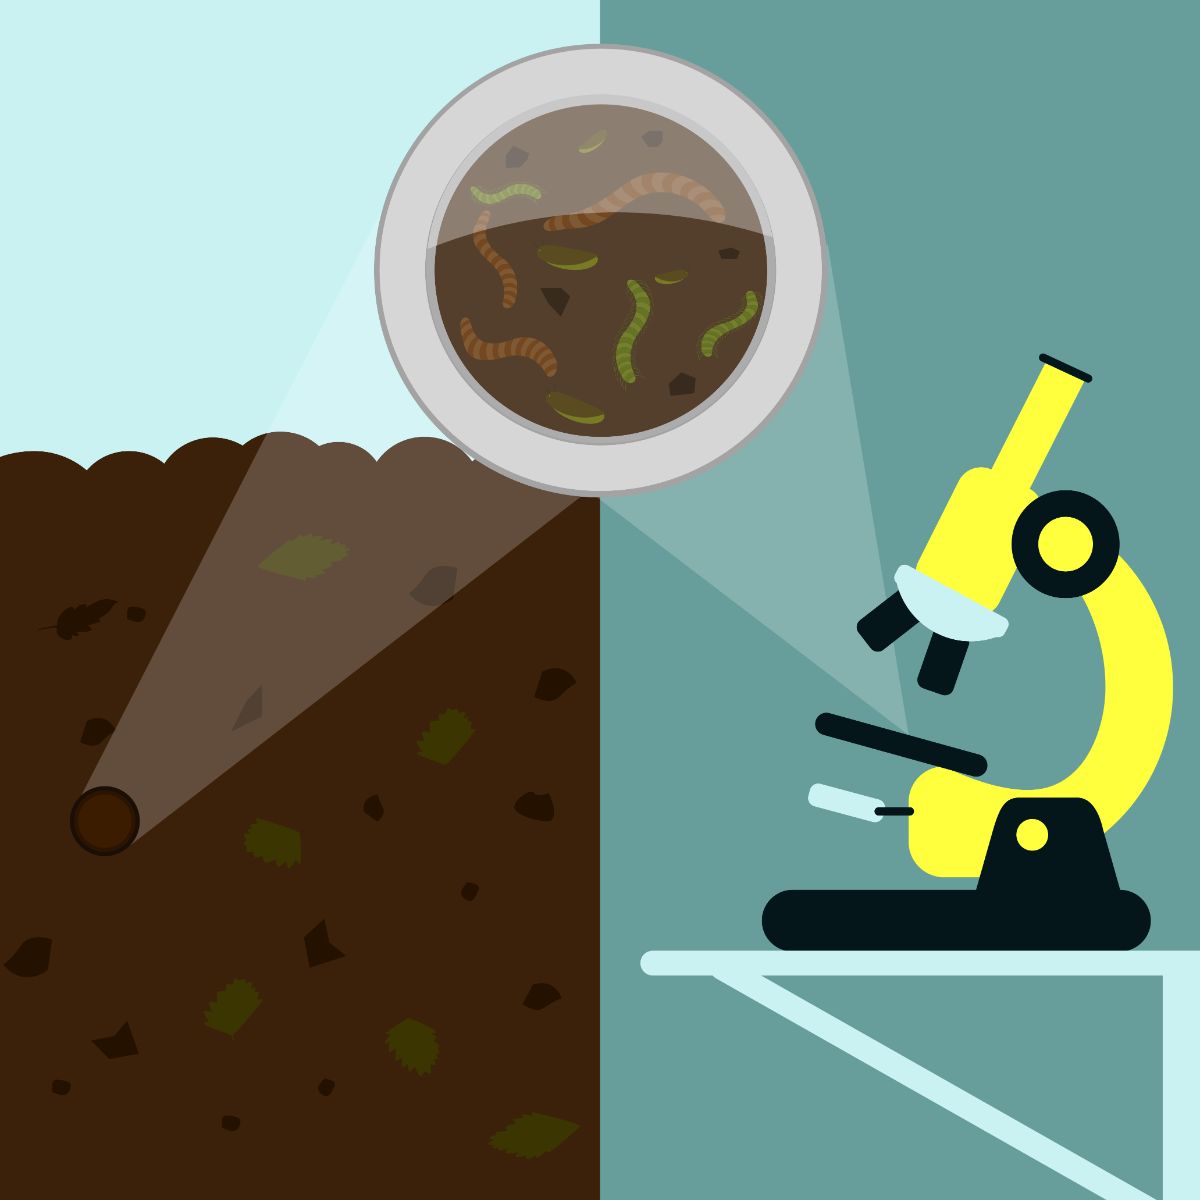 Image showing a cartoon microscope and soil